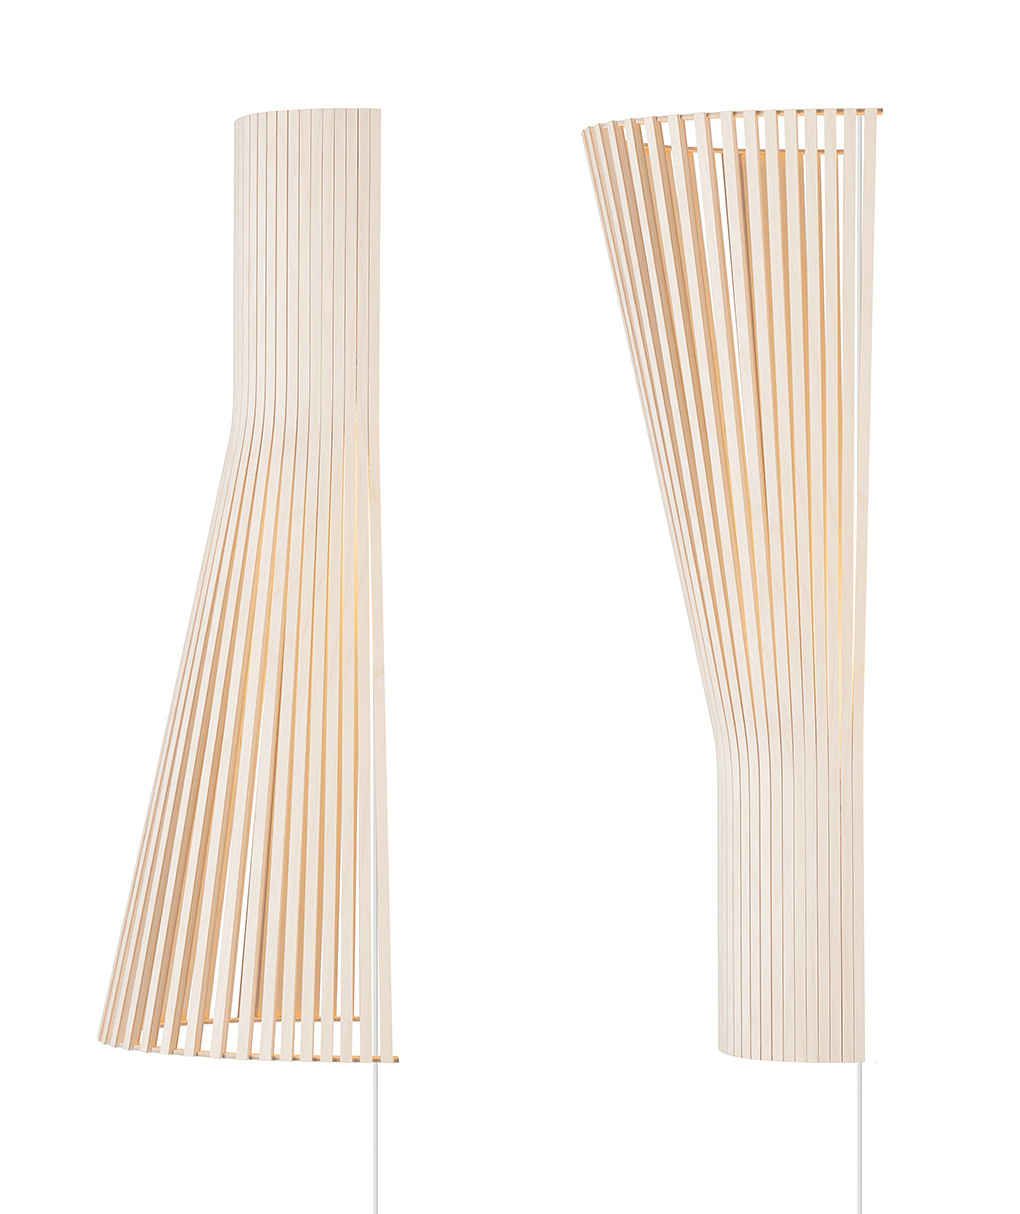 Secto 4230 wall lamp is available in natural birch